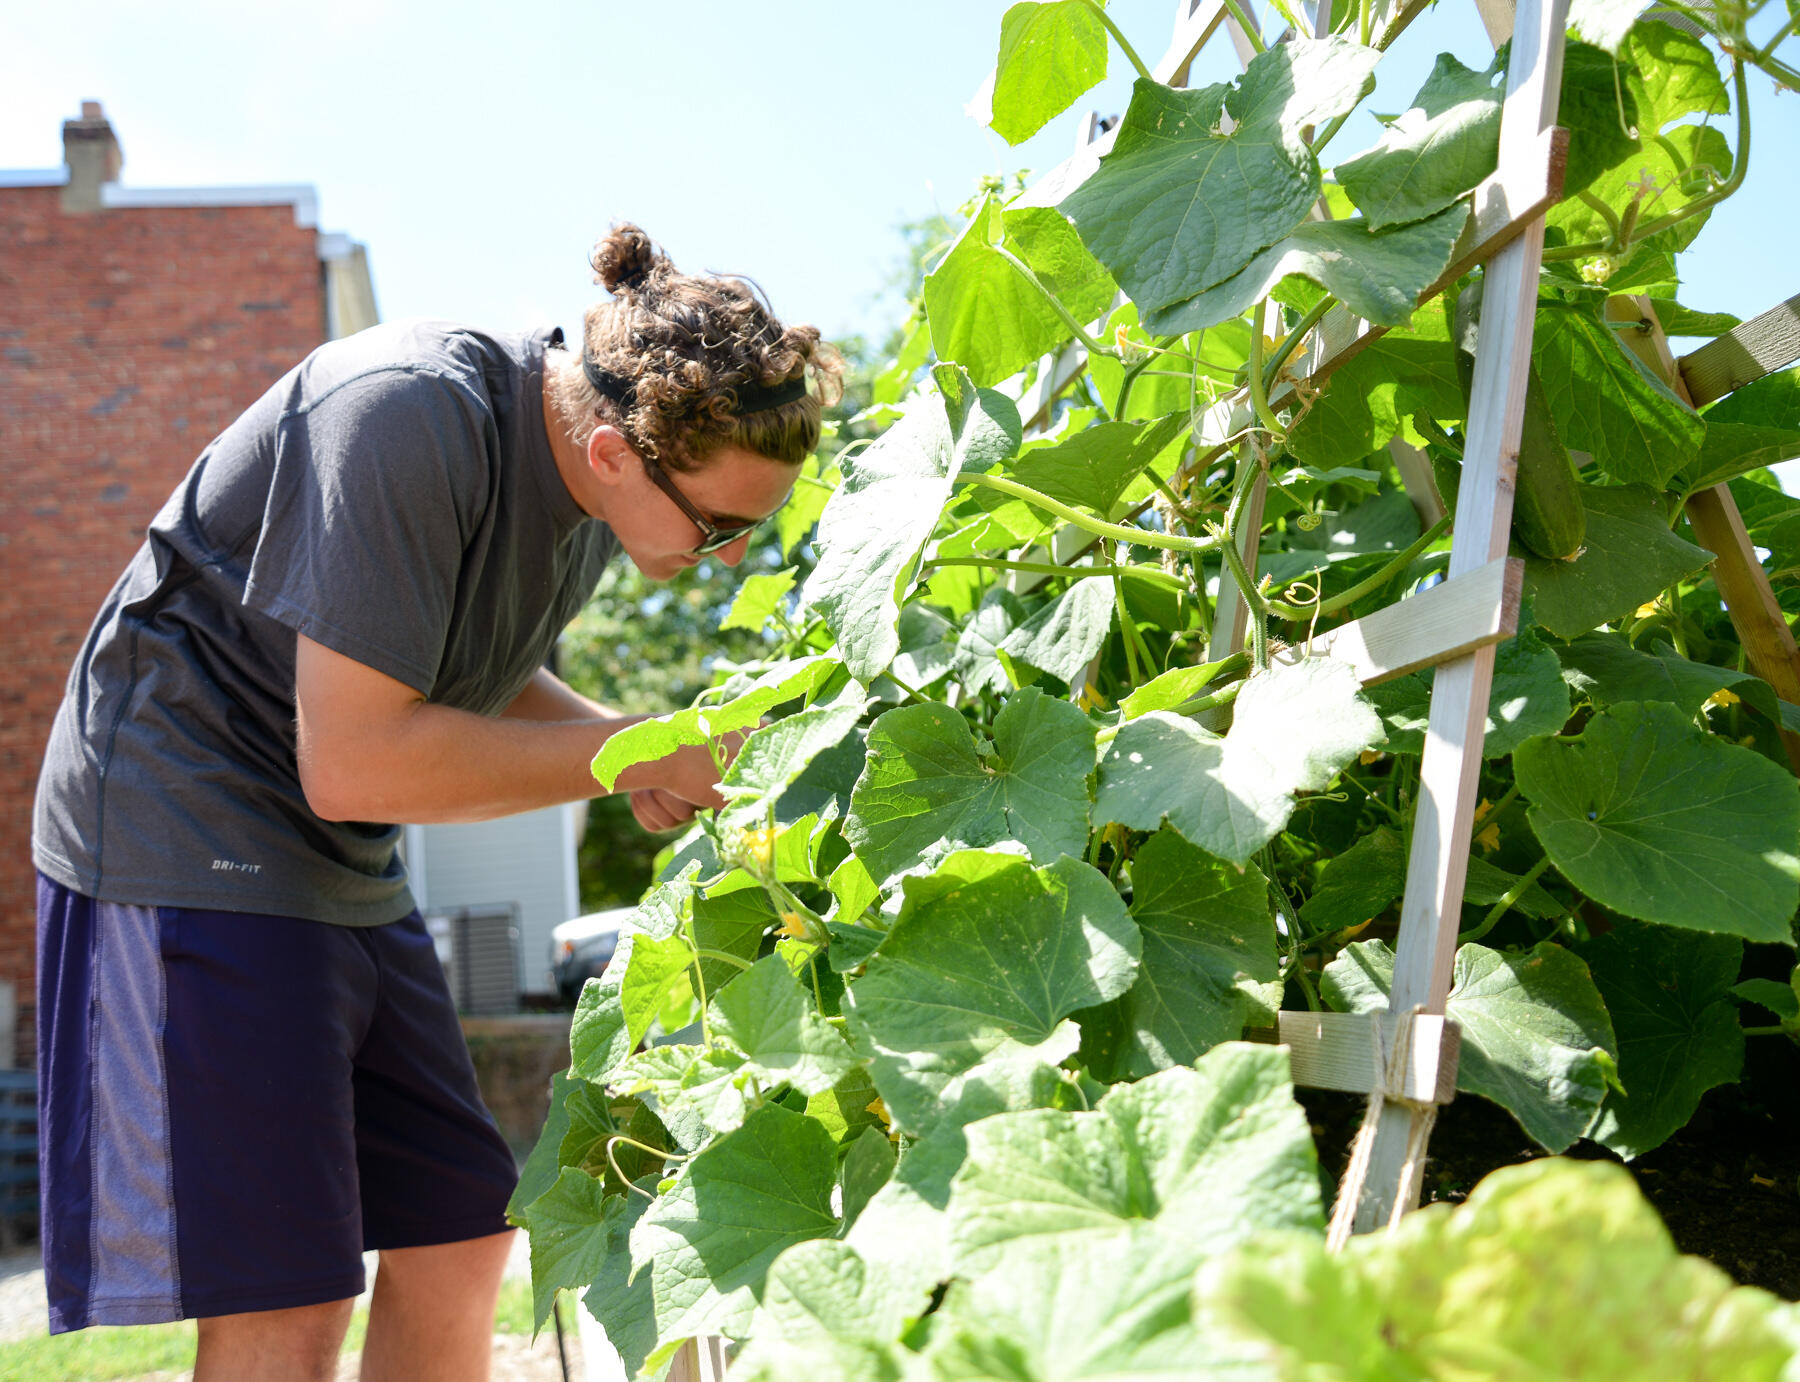 Spencer Marfing, intern at the Center for High Blood Pressure, picks produce at the Monroe Park Campus Learning Garden. Food from the garden supports patients at the center.